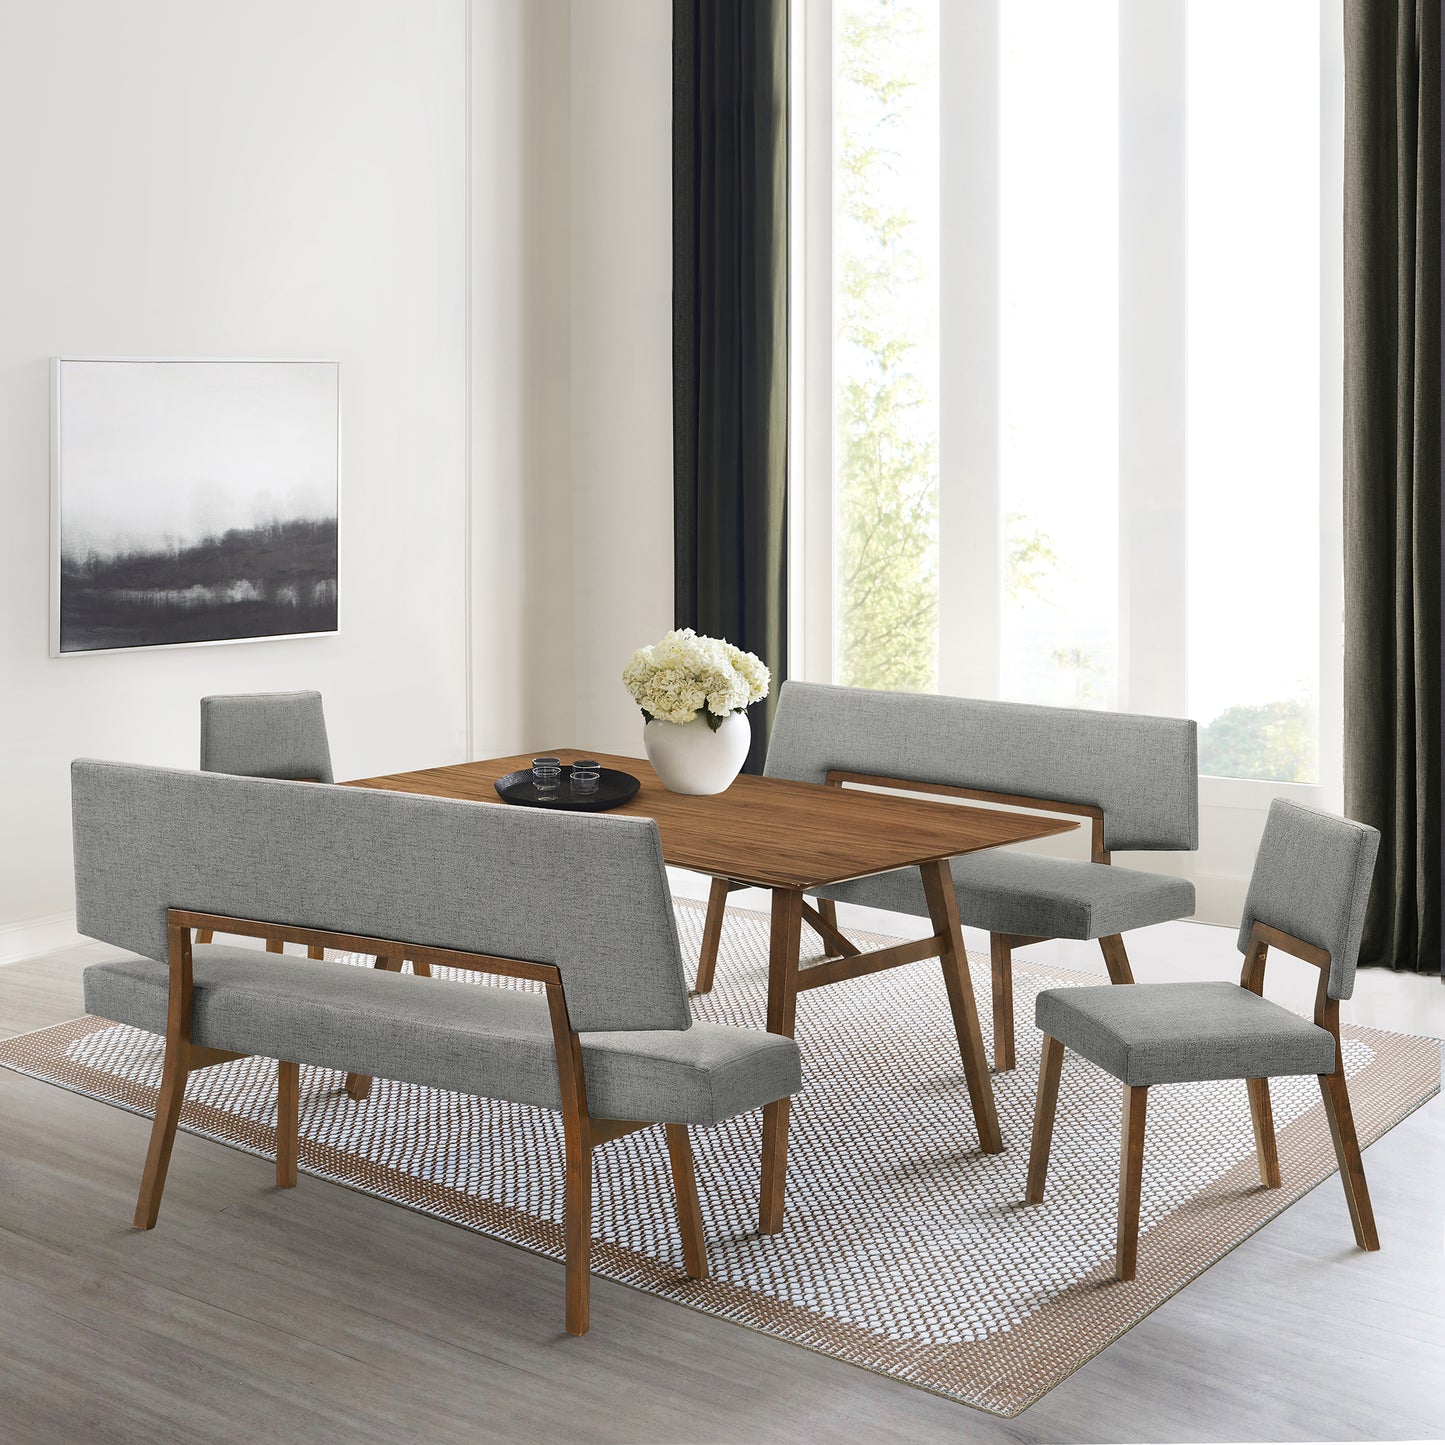 Channell 5 Piece Walnut Wood Dining Table Set with Benches in Charcoal Fabric